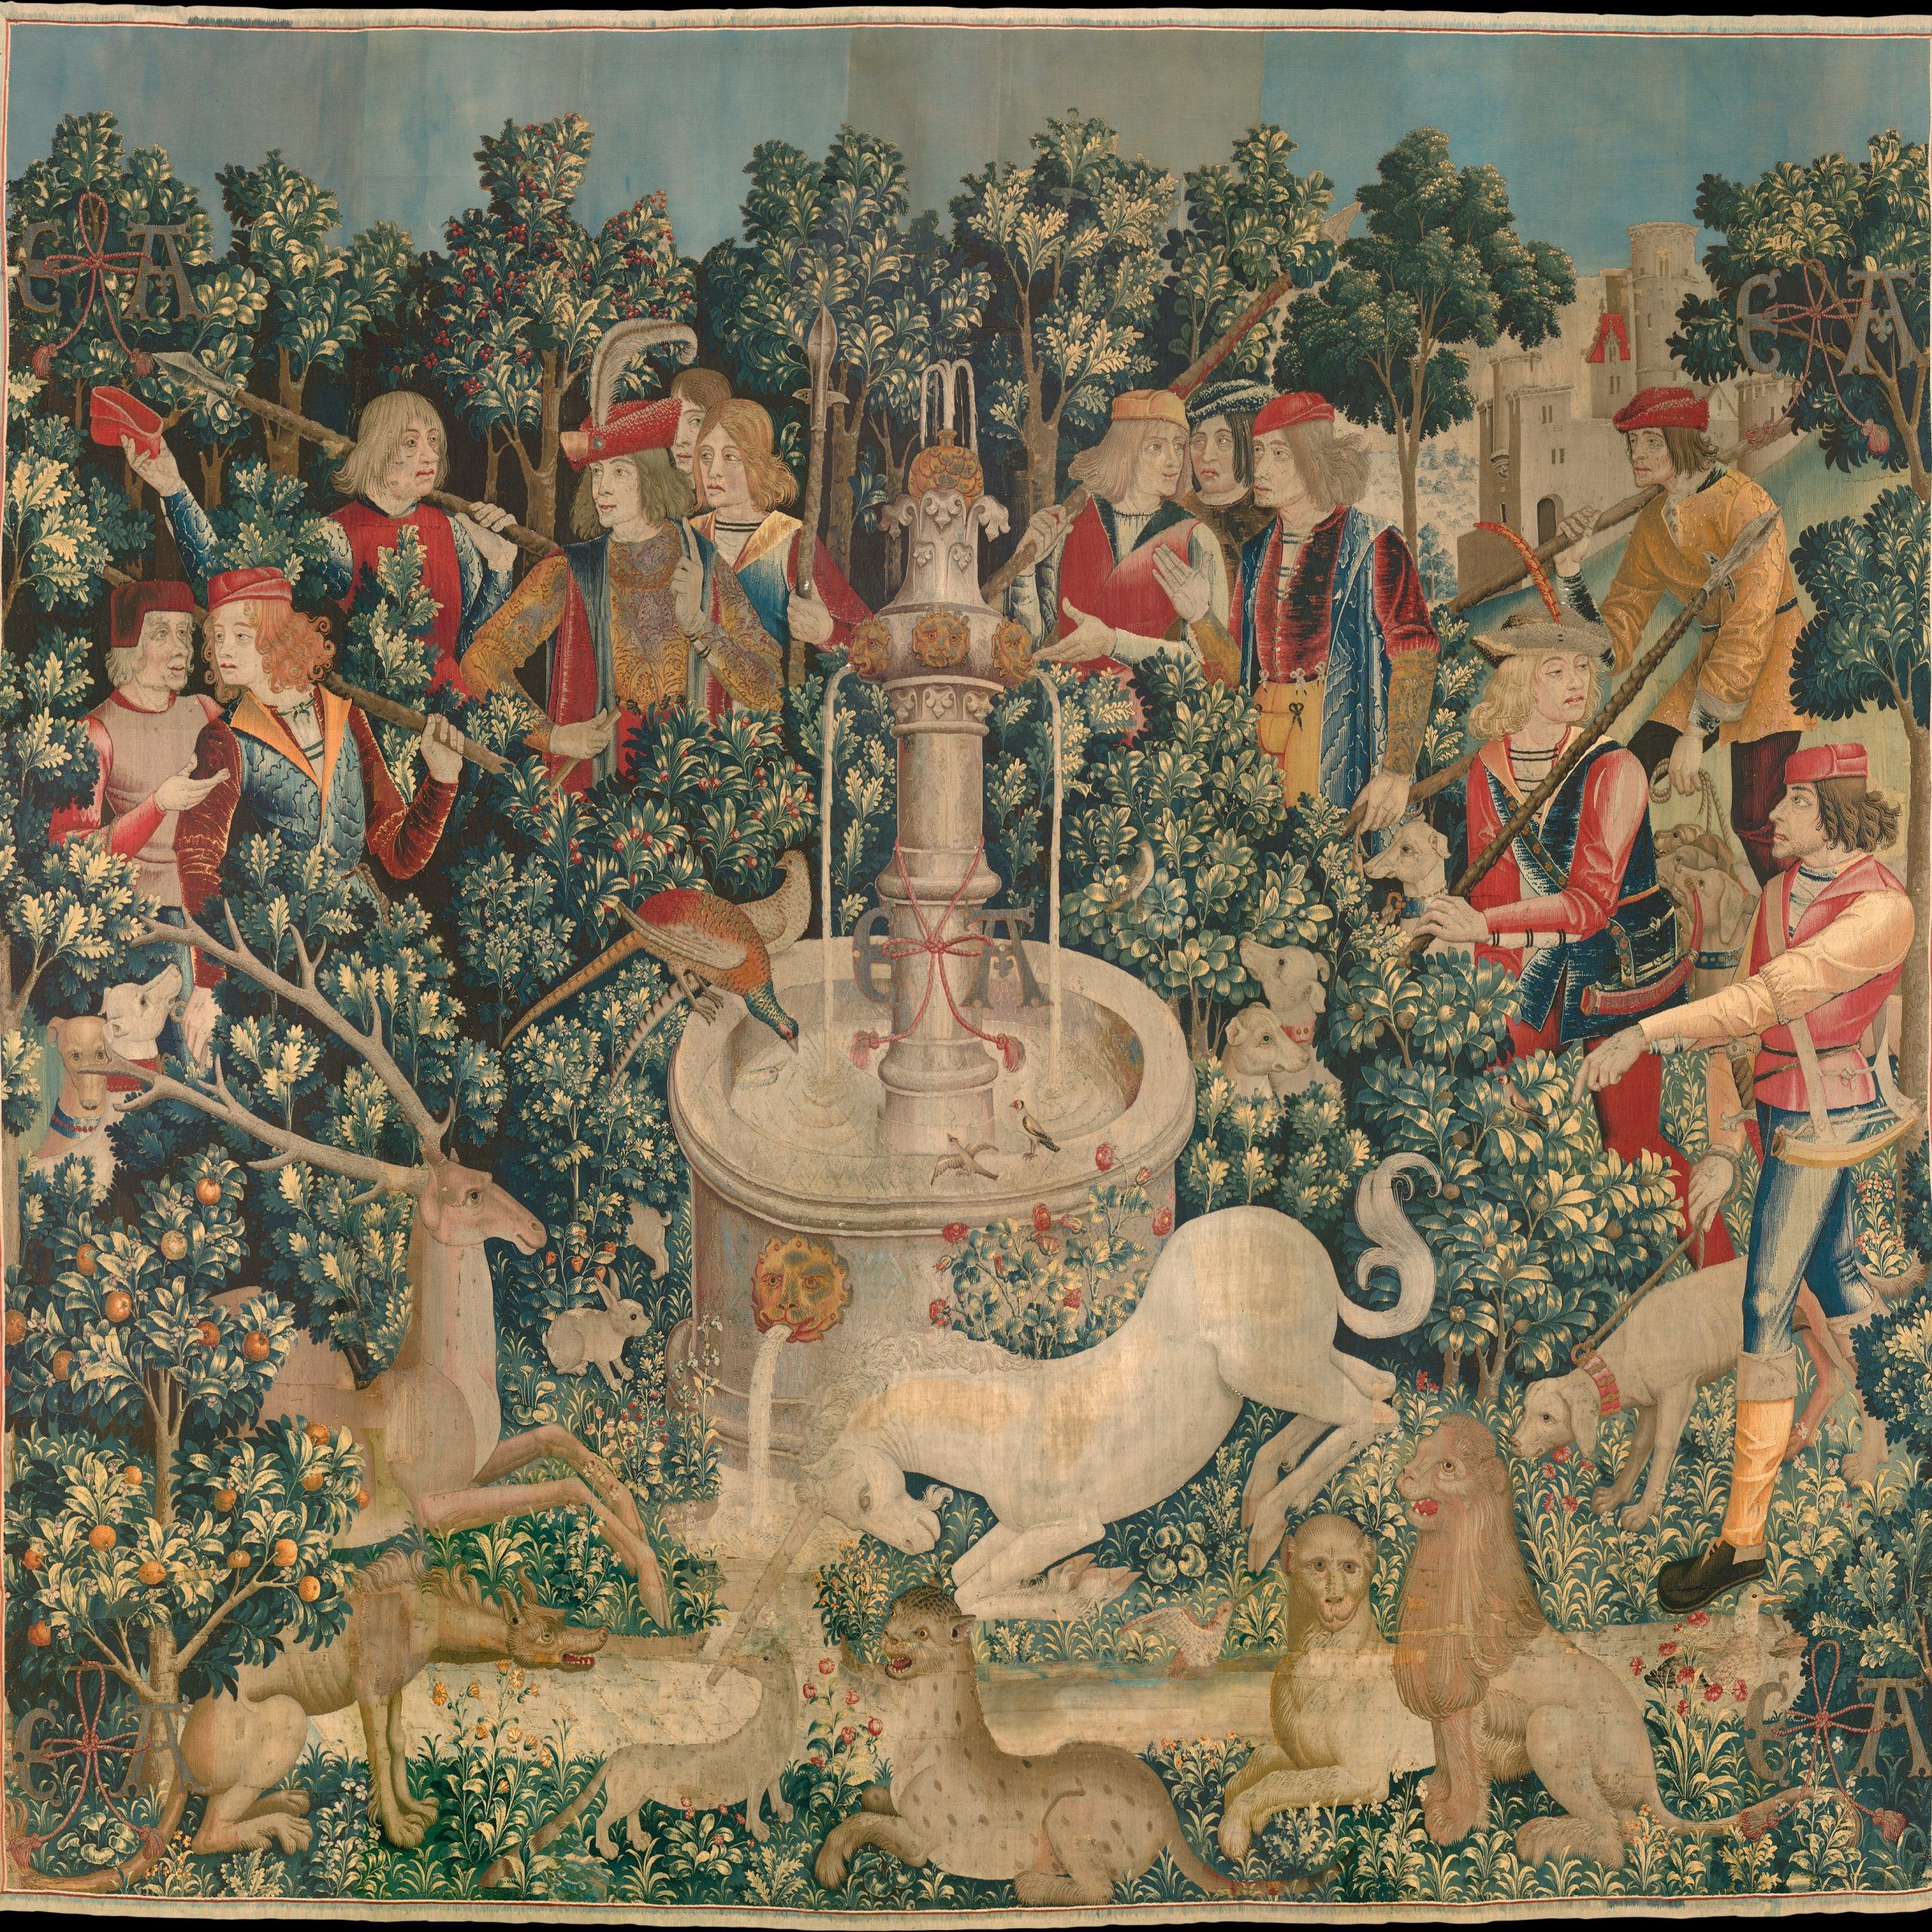 Tapestry – Wikipedia Regarding Fashionable Blended Fabric Trust In The Lord Tapestries And Wall Hangings (View 17 of 20)